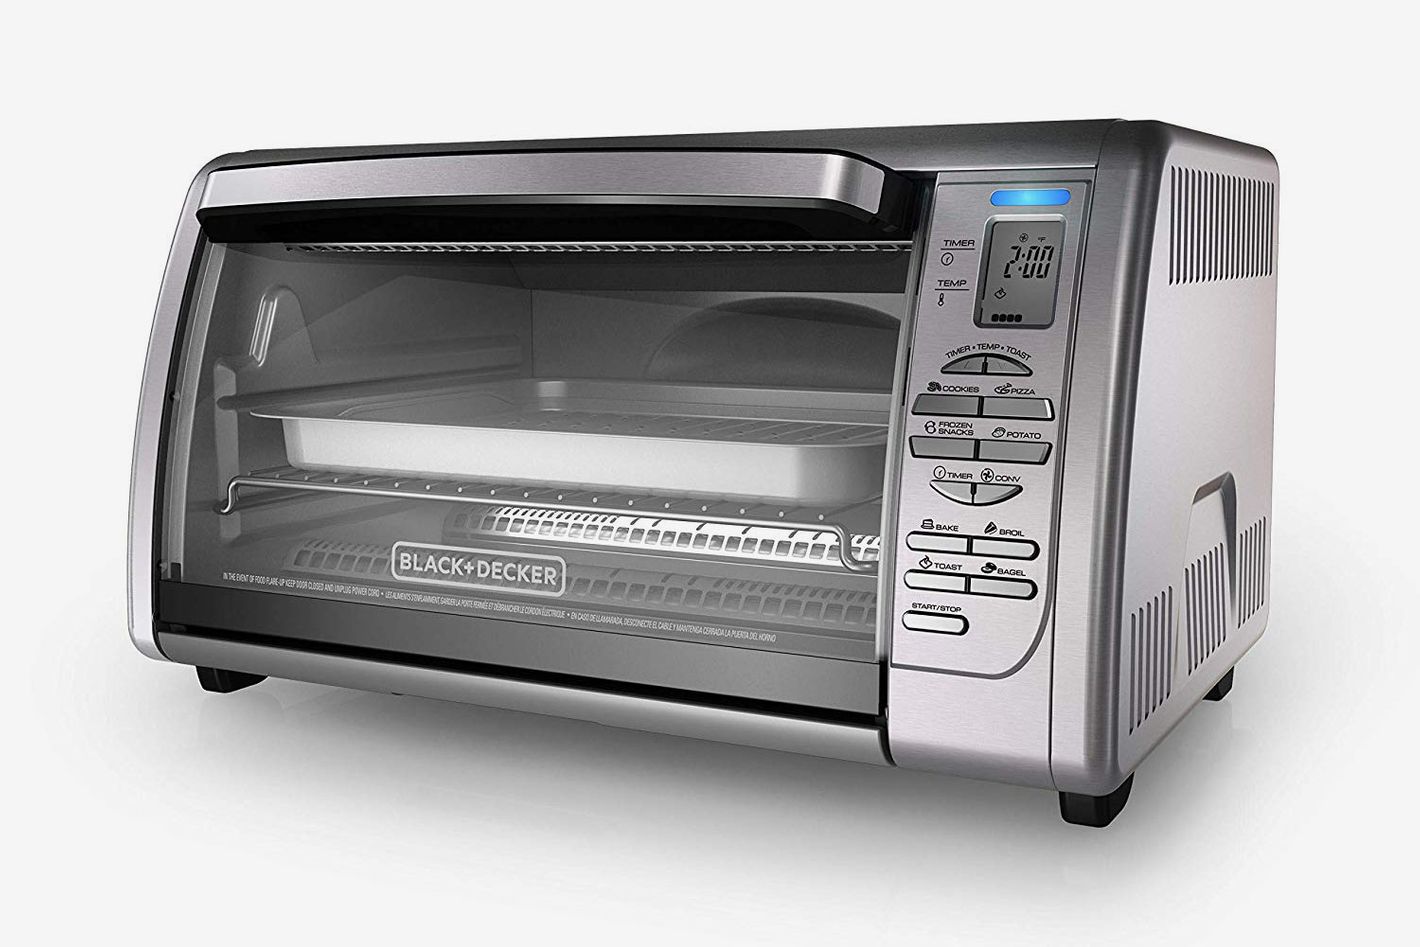 7 Best Microwave Ovens and Countertop Microwaves - 2019